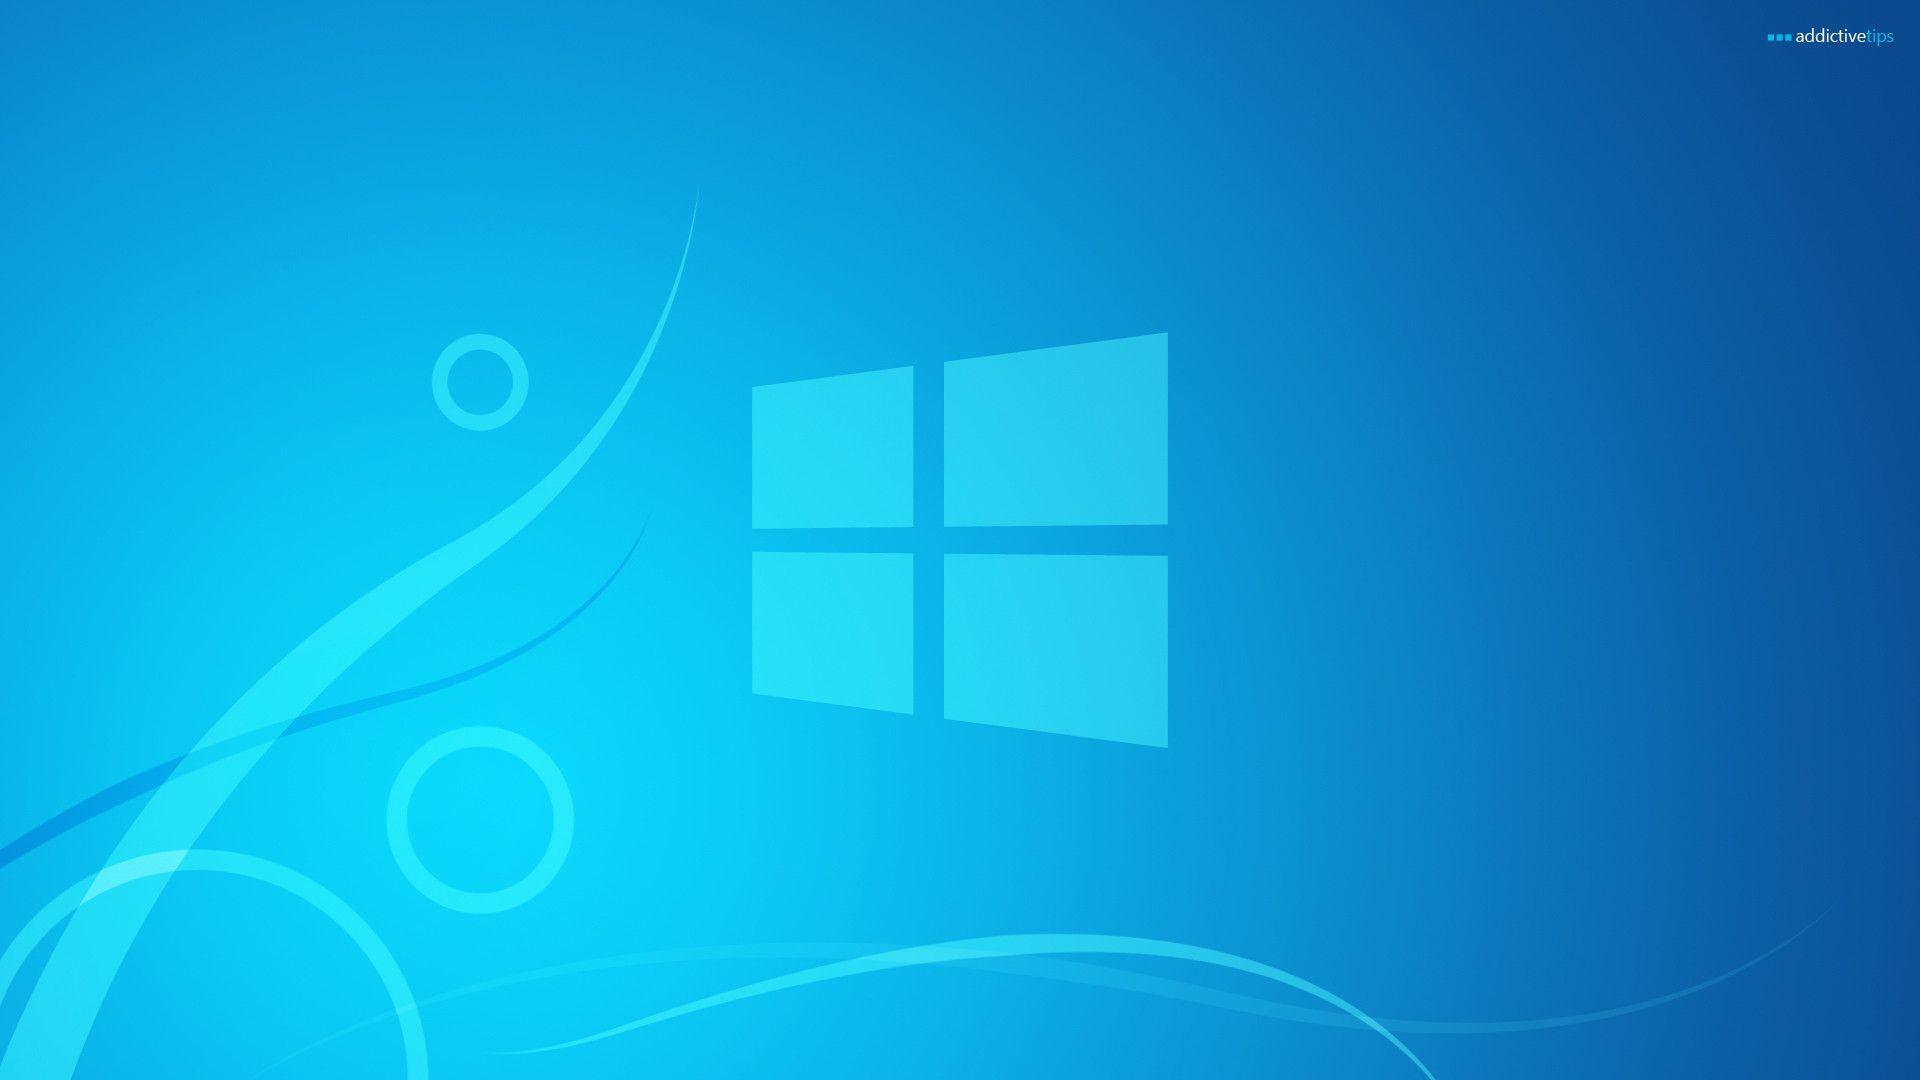 Windows 8 Official Wallpapers Wallpaper Cave